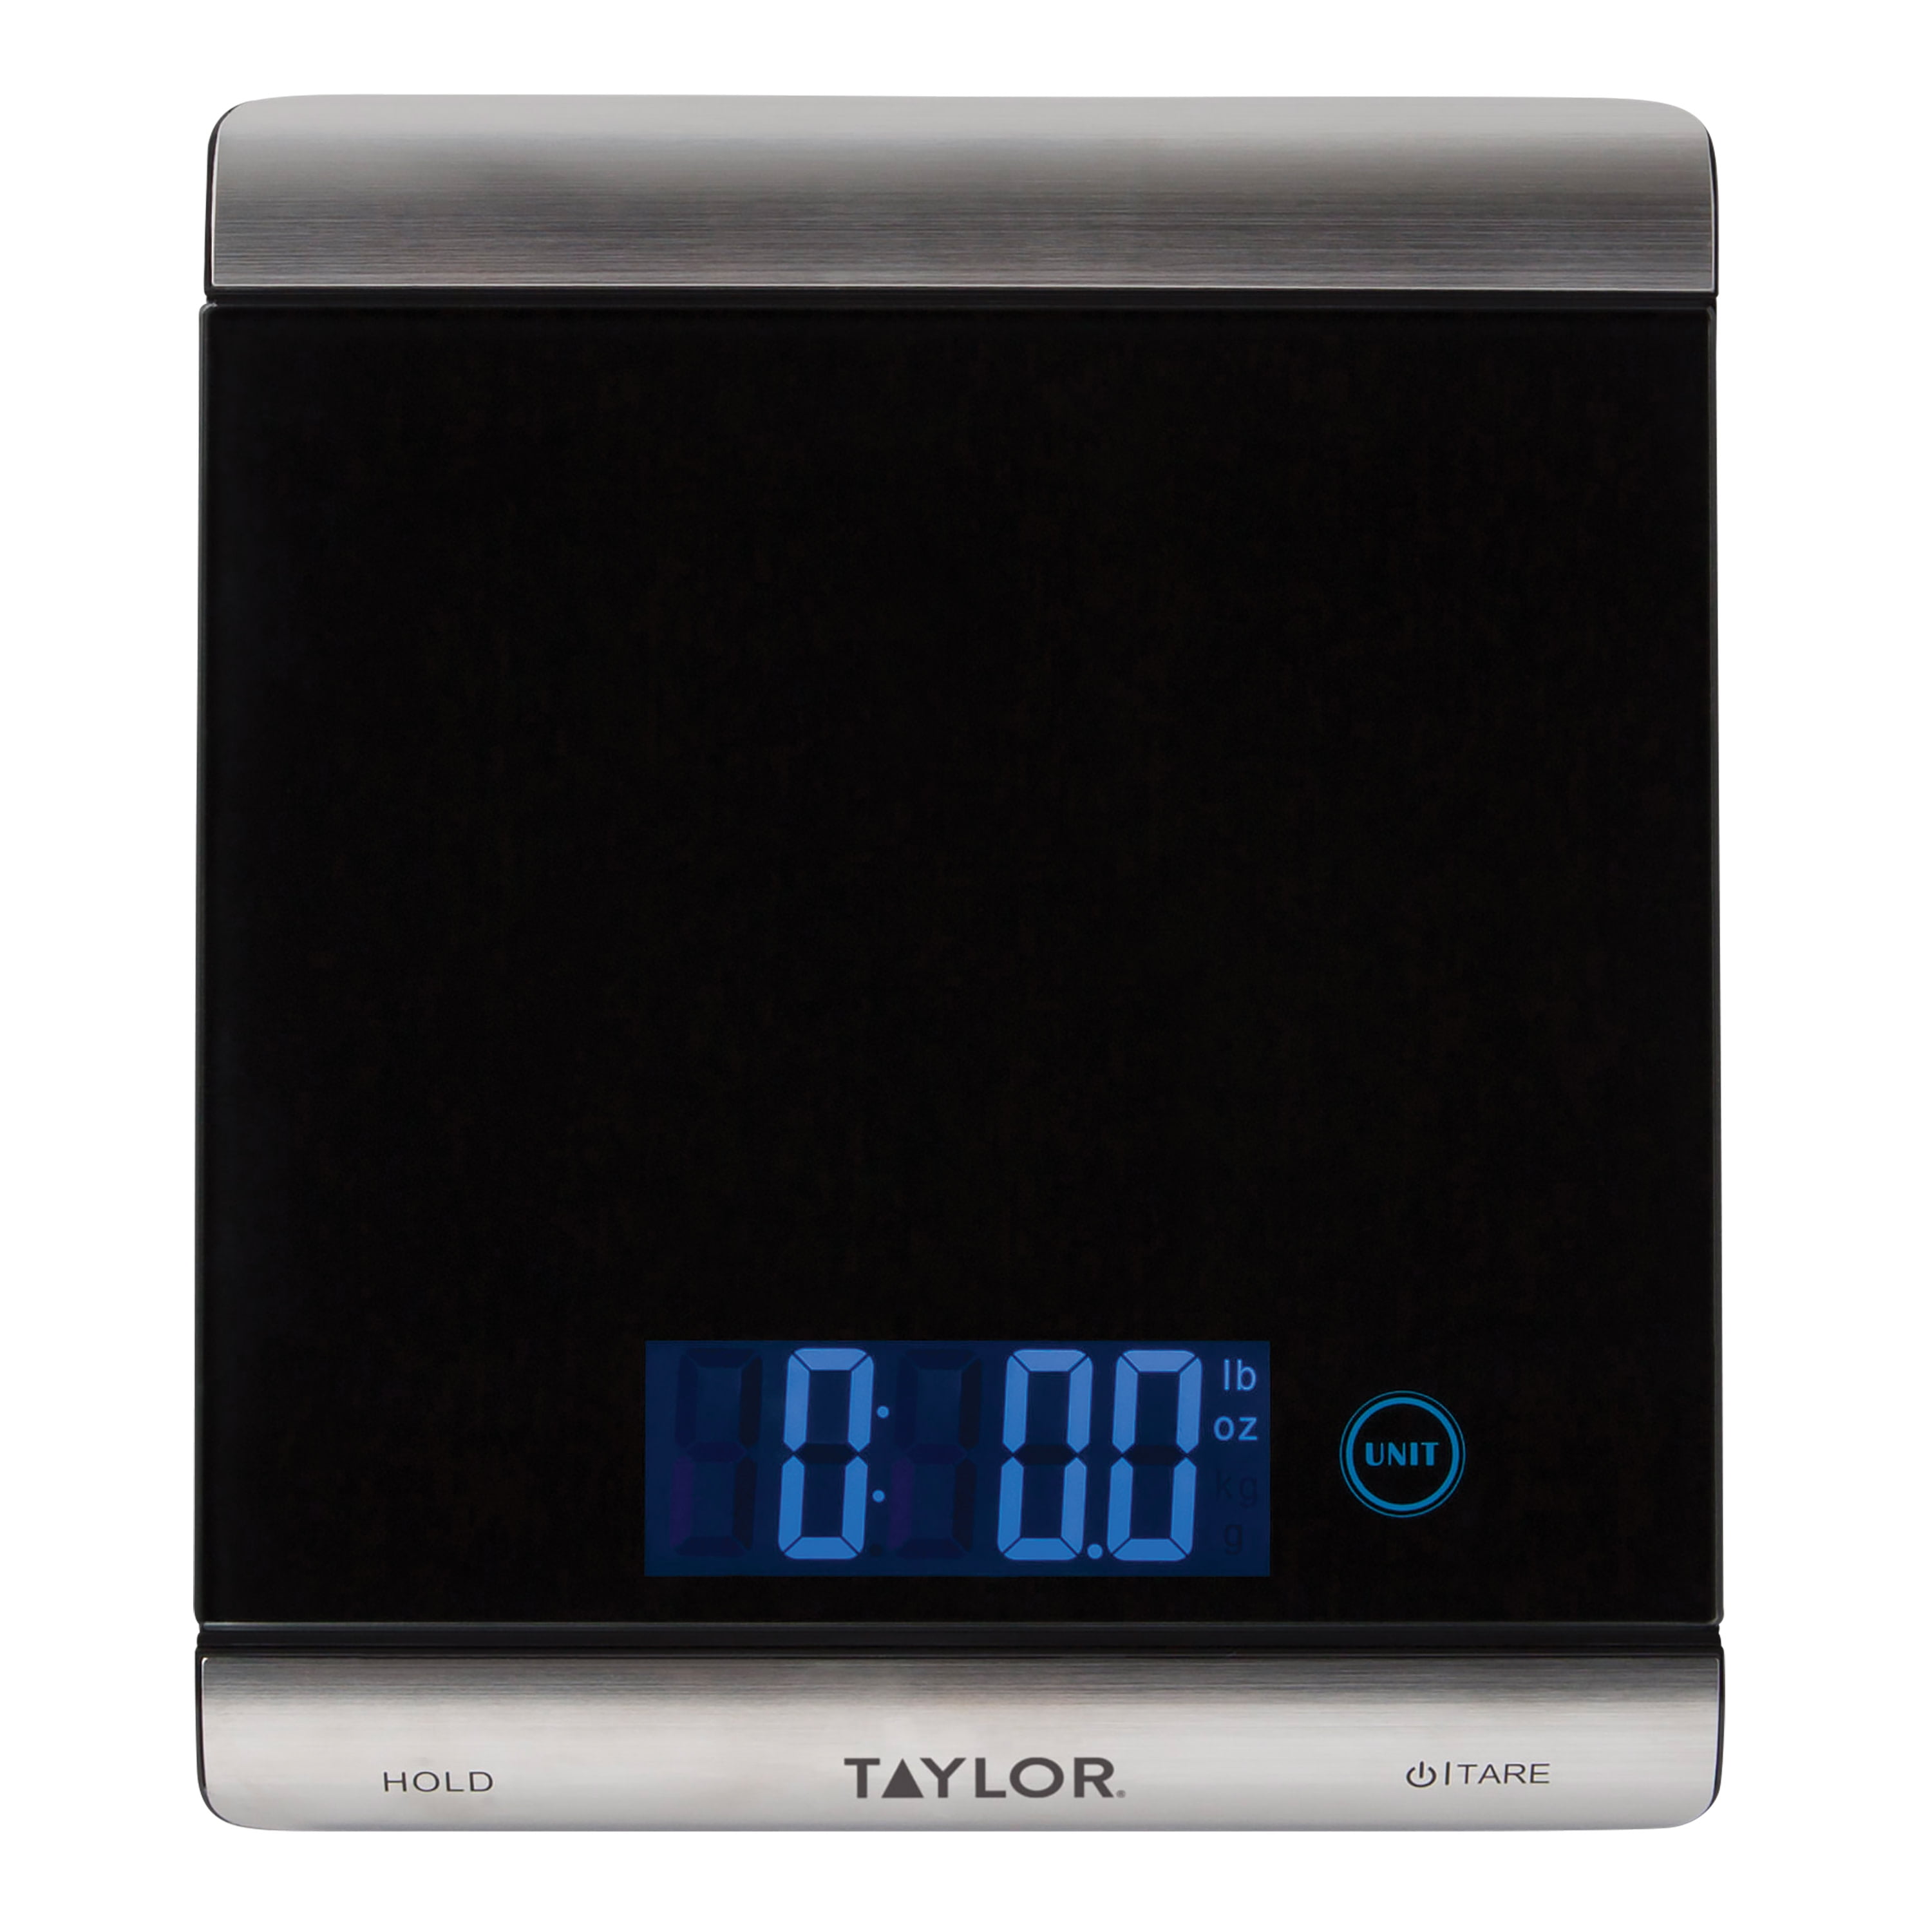 Taylor High-Capacity 33 Pound Digital Kitchen Scale and Food Scale with Hold and Tare Functions in Black and Stainless Steel